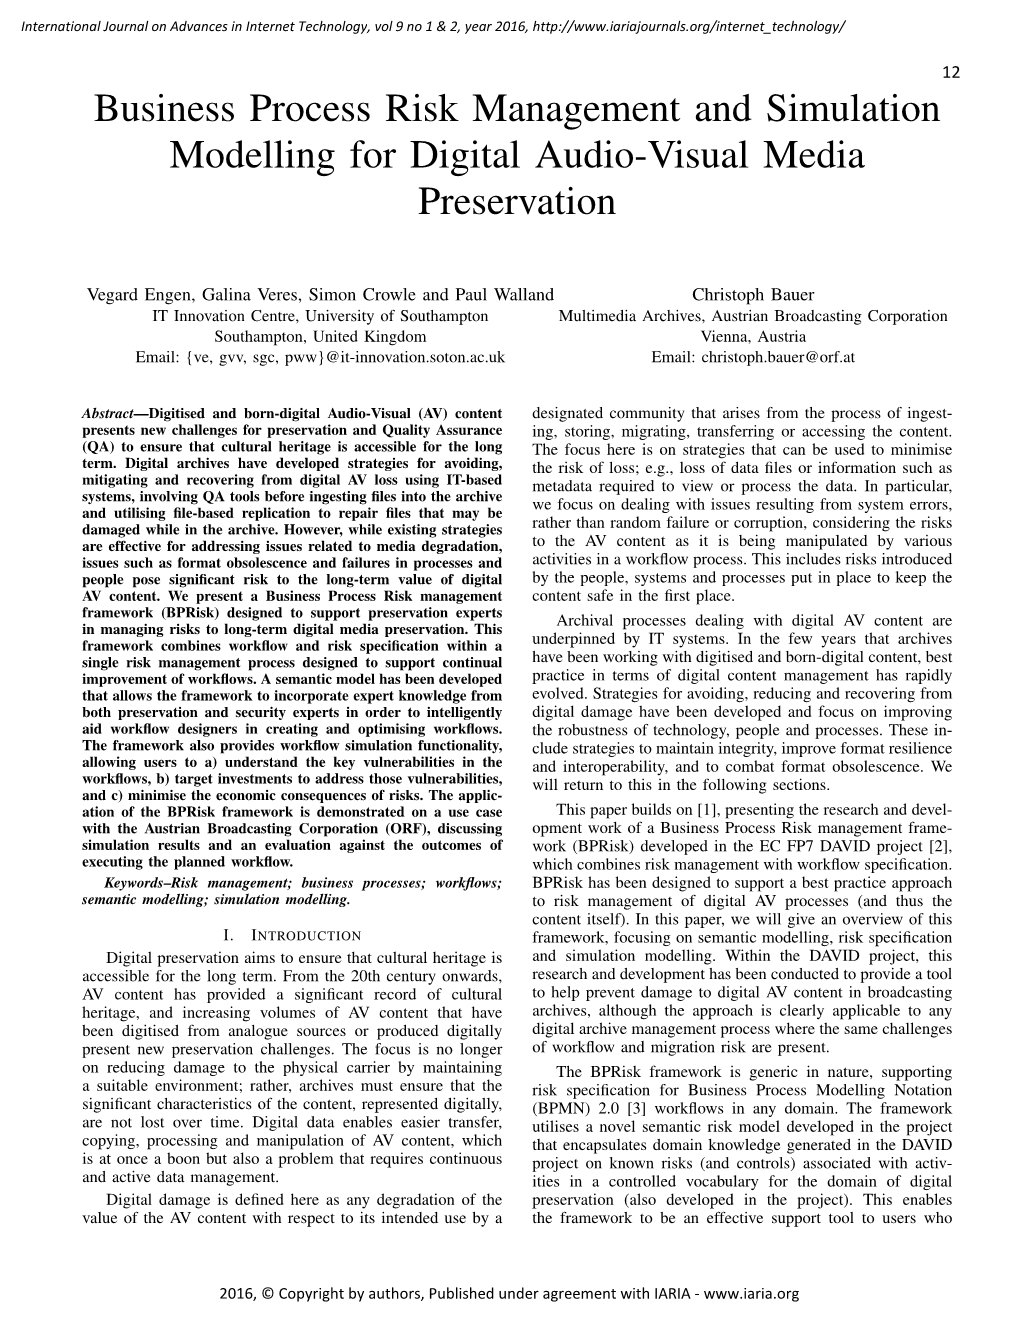 Business Process Risk Management and Simulation Modelling for Digital Audio-Visual Media Preservation